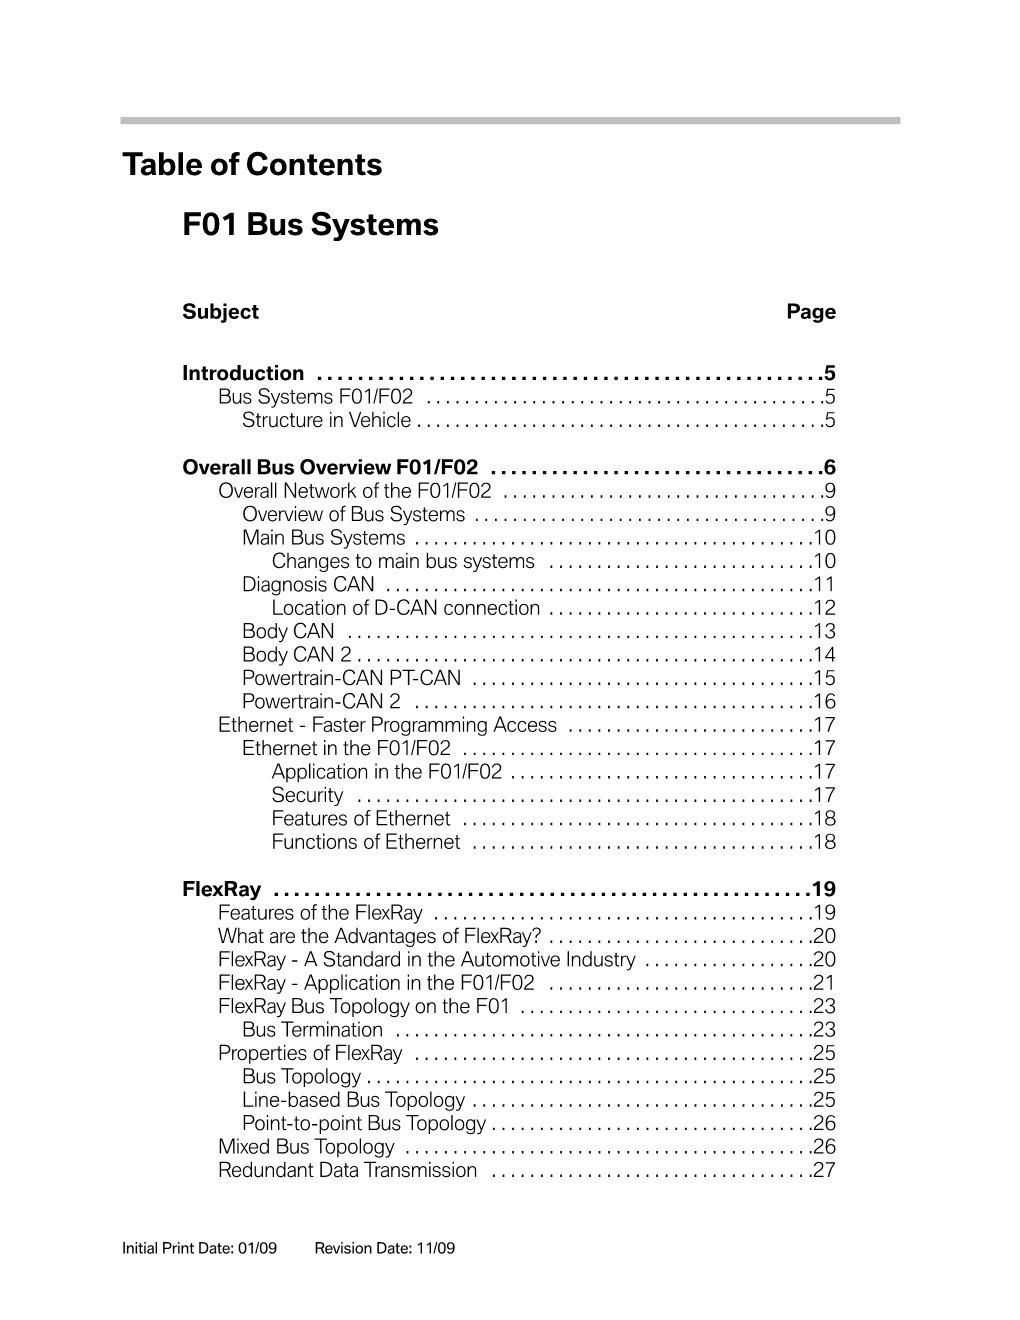 Table of Contents F01 Bus Systems